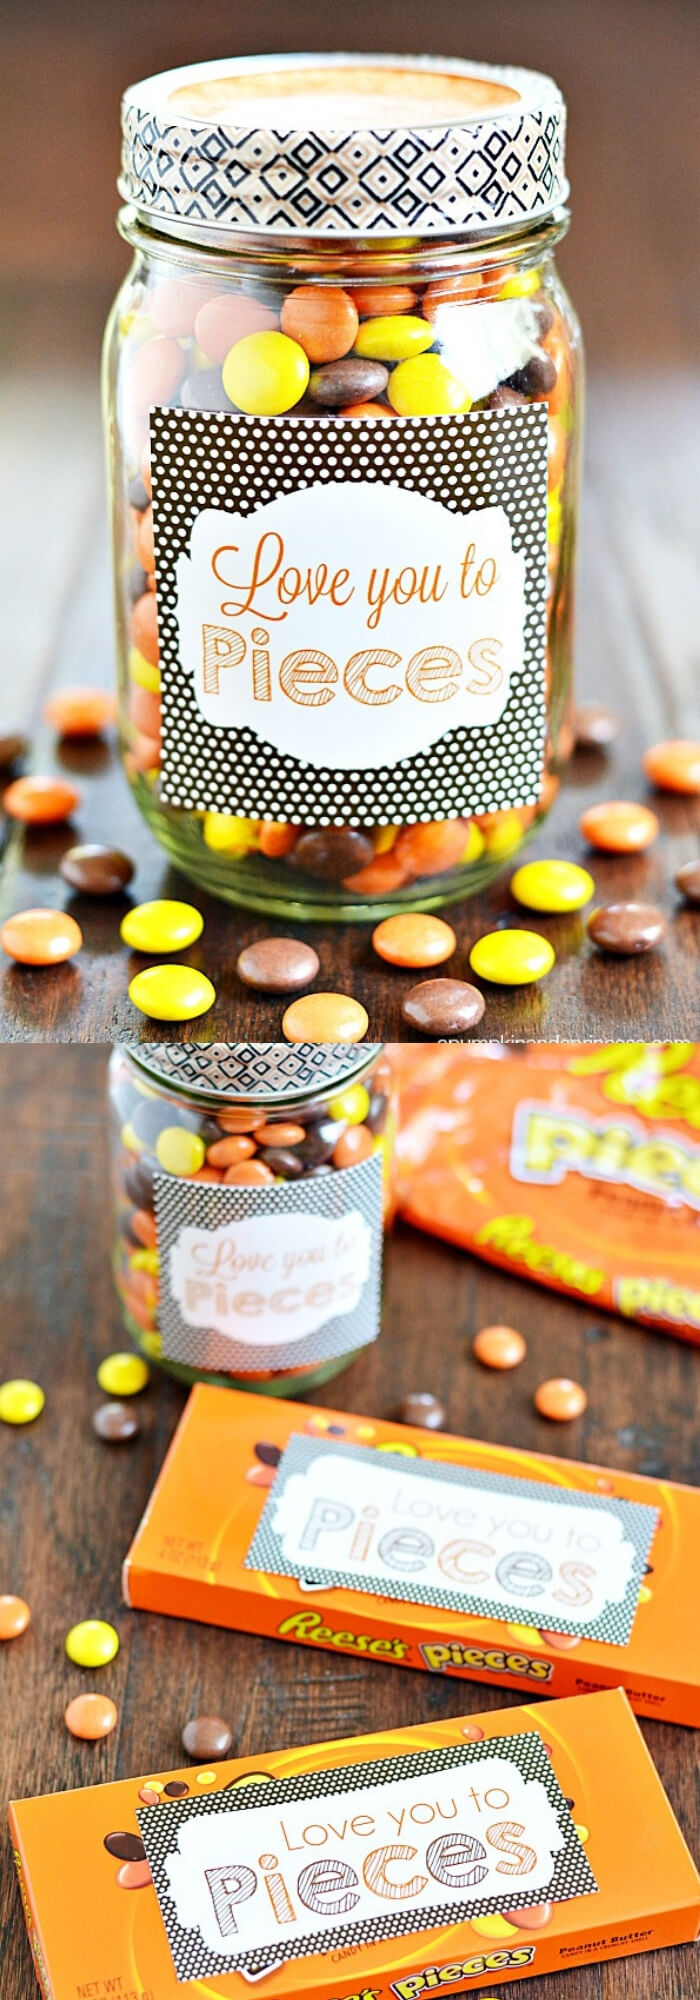 Love You To Pieces | DIY Mason Jar Gift Ideas For Valentine's Day | FarmFoodFamily.com